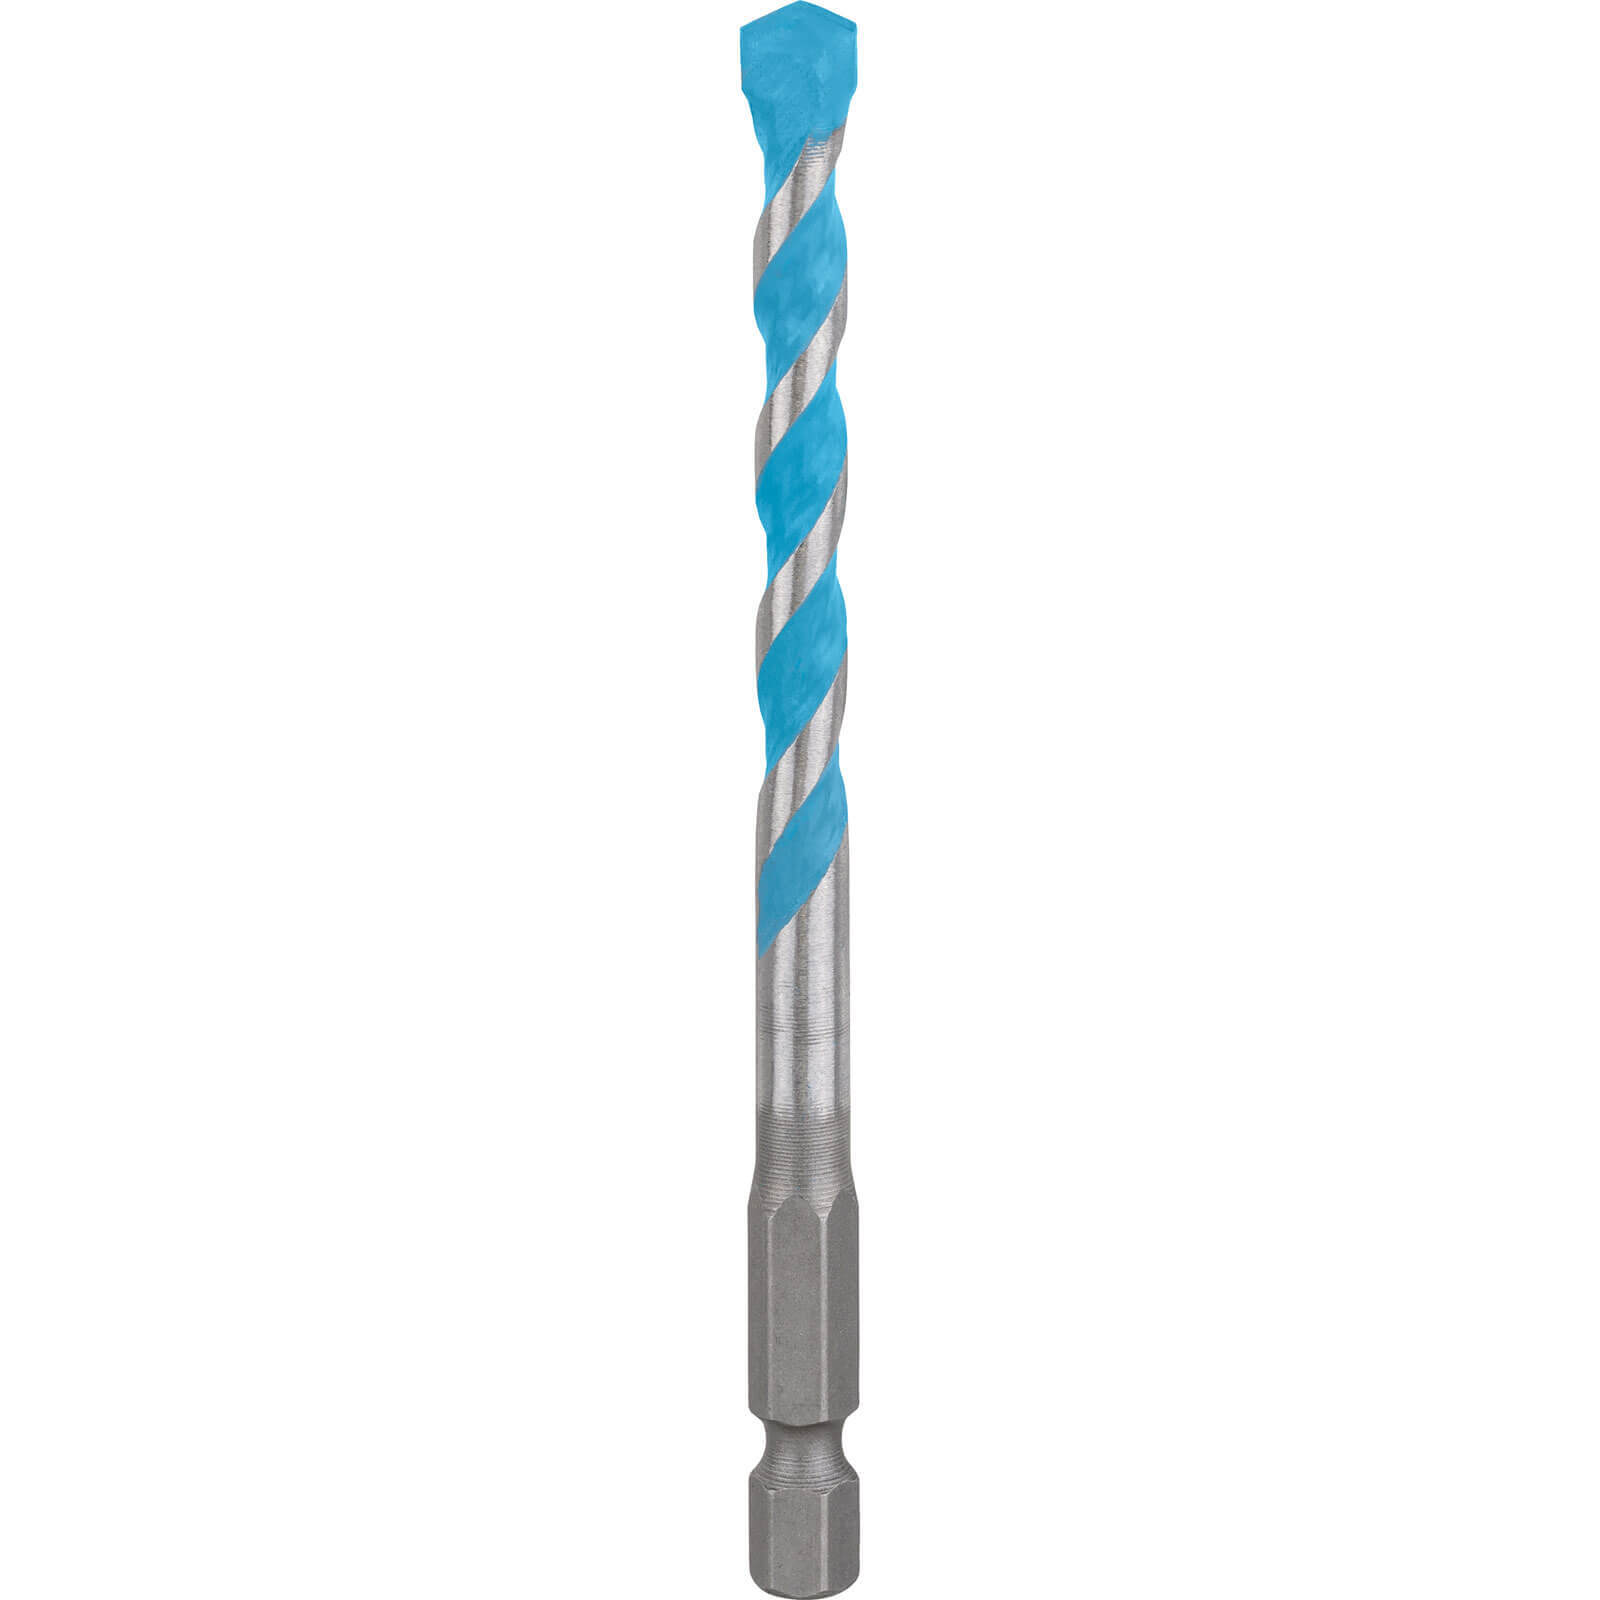 Image of Bosch Expert HEX-9 Multi Construction Drill Bit 7mm 150mm Pack of 1